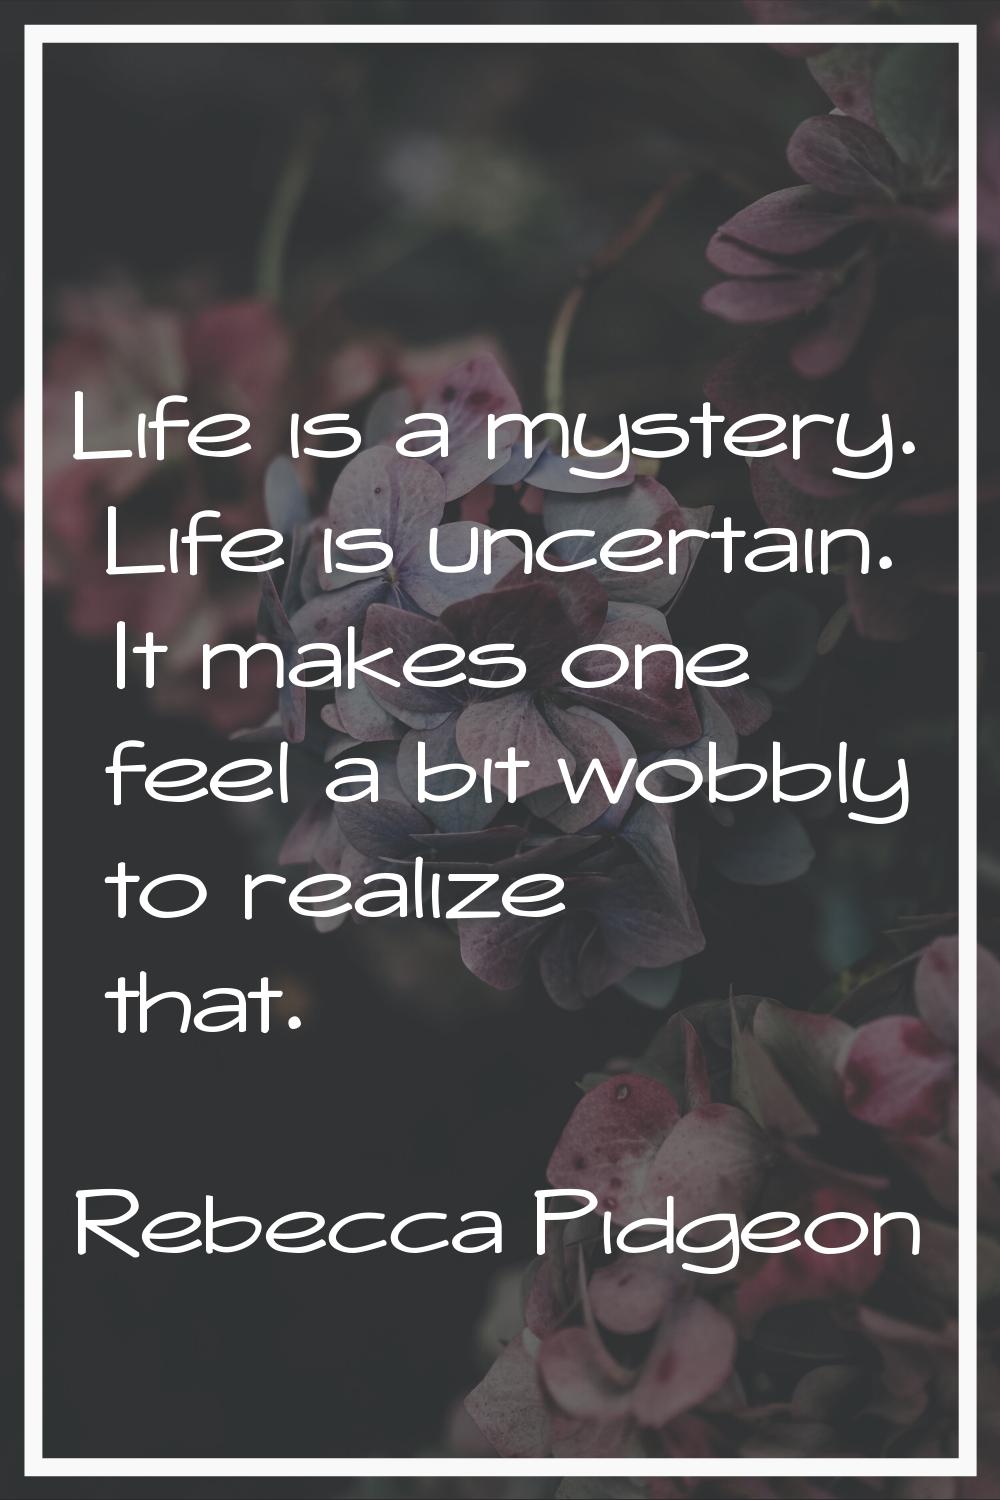 Life is a mystery. Life is uncertain. It makes one feel a bit wobbly to realize that.